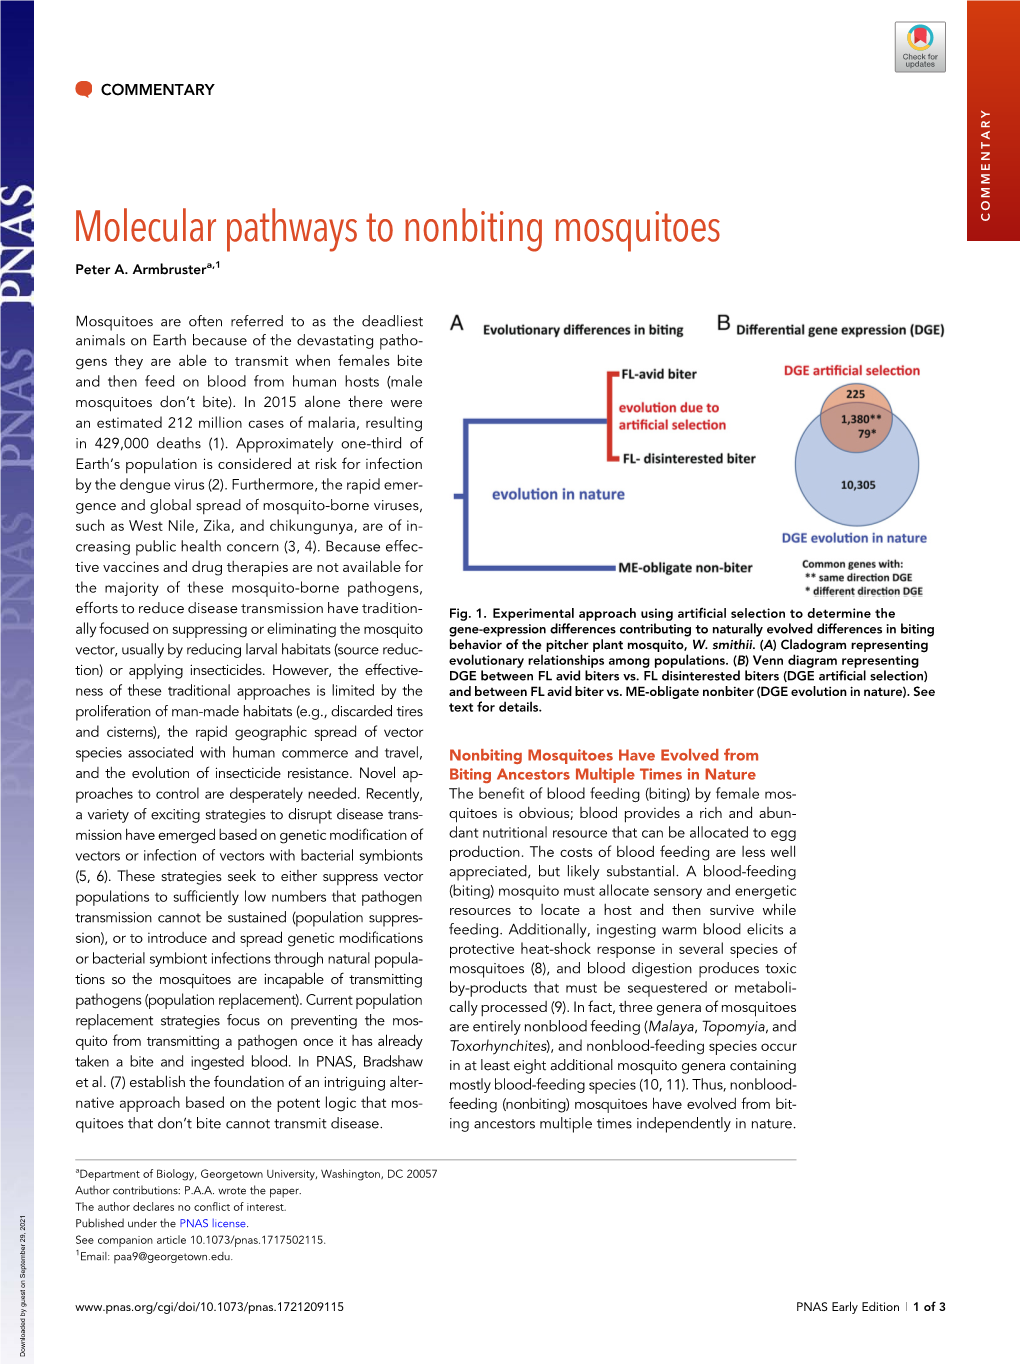 Molecular Pathways to Nonbiting Mosquitoes COMMENTARY Peter A